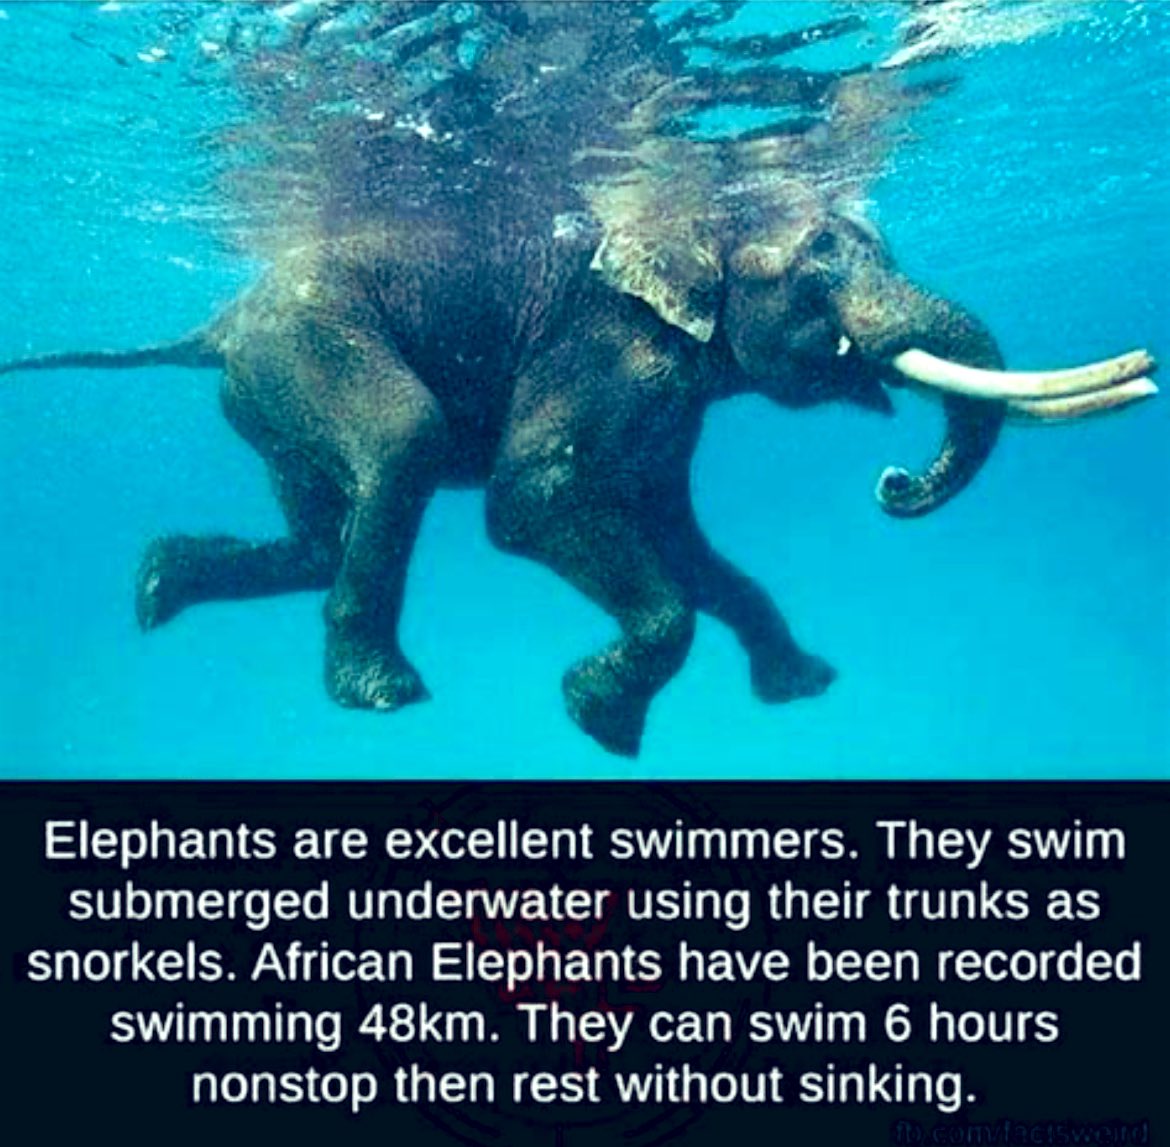 @EndWokeness 🐘 Elephants Make Better Swimmers! Isn’t that right @ProudElephantUS? 💥 King of the Jungle, We Never Forget RINOs Who Dress Up as Elephants. 🌵Sink or swim, time to #RecallKatieHobbs because she installed Biden and kept the Border open to boost Democrat votes and facilitate…